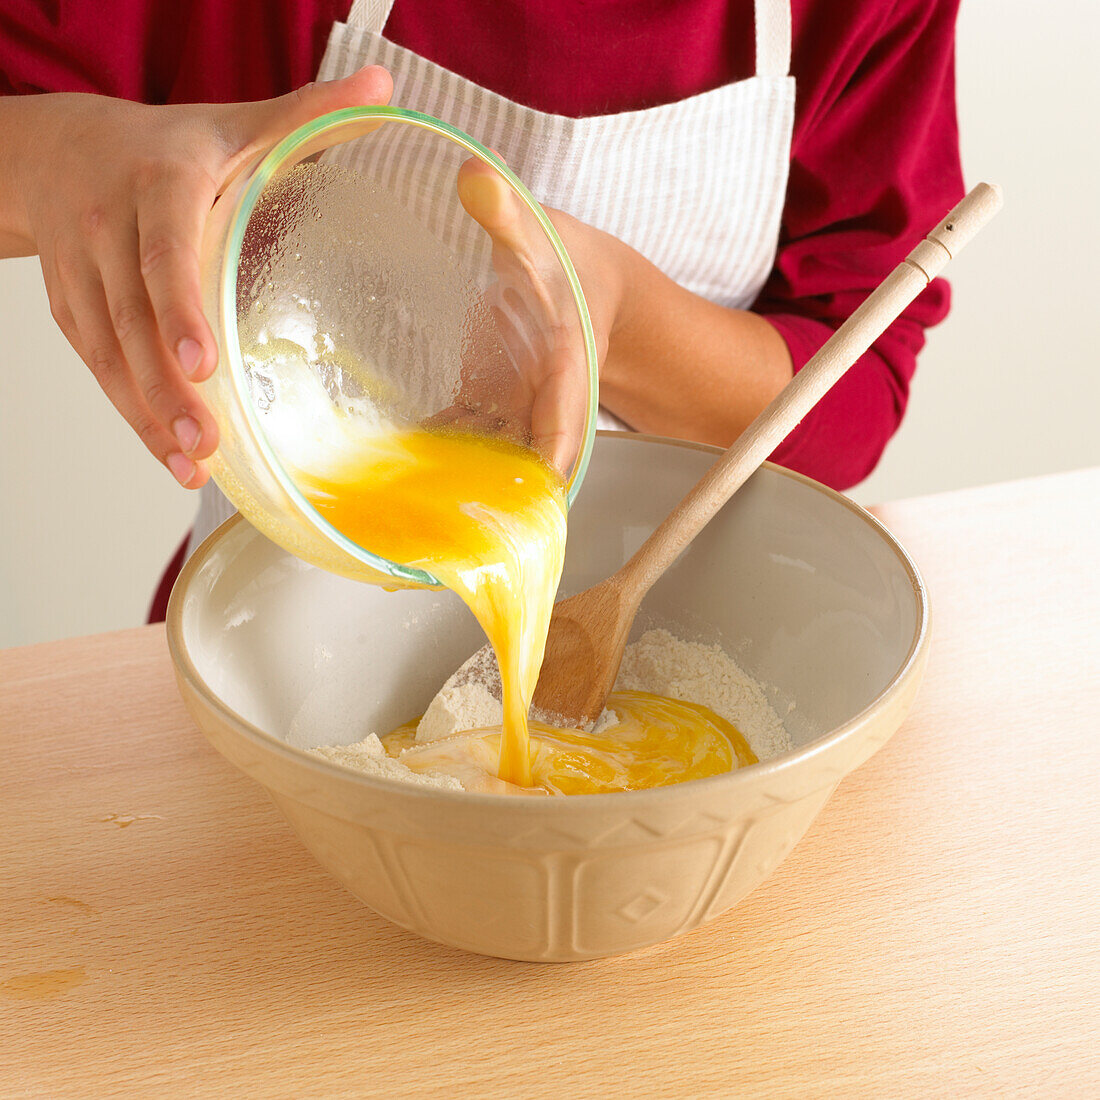 Boy pouring egg yoke from glass bowl into large mixing bowl